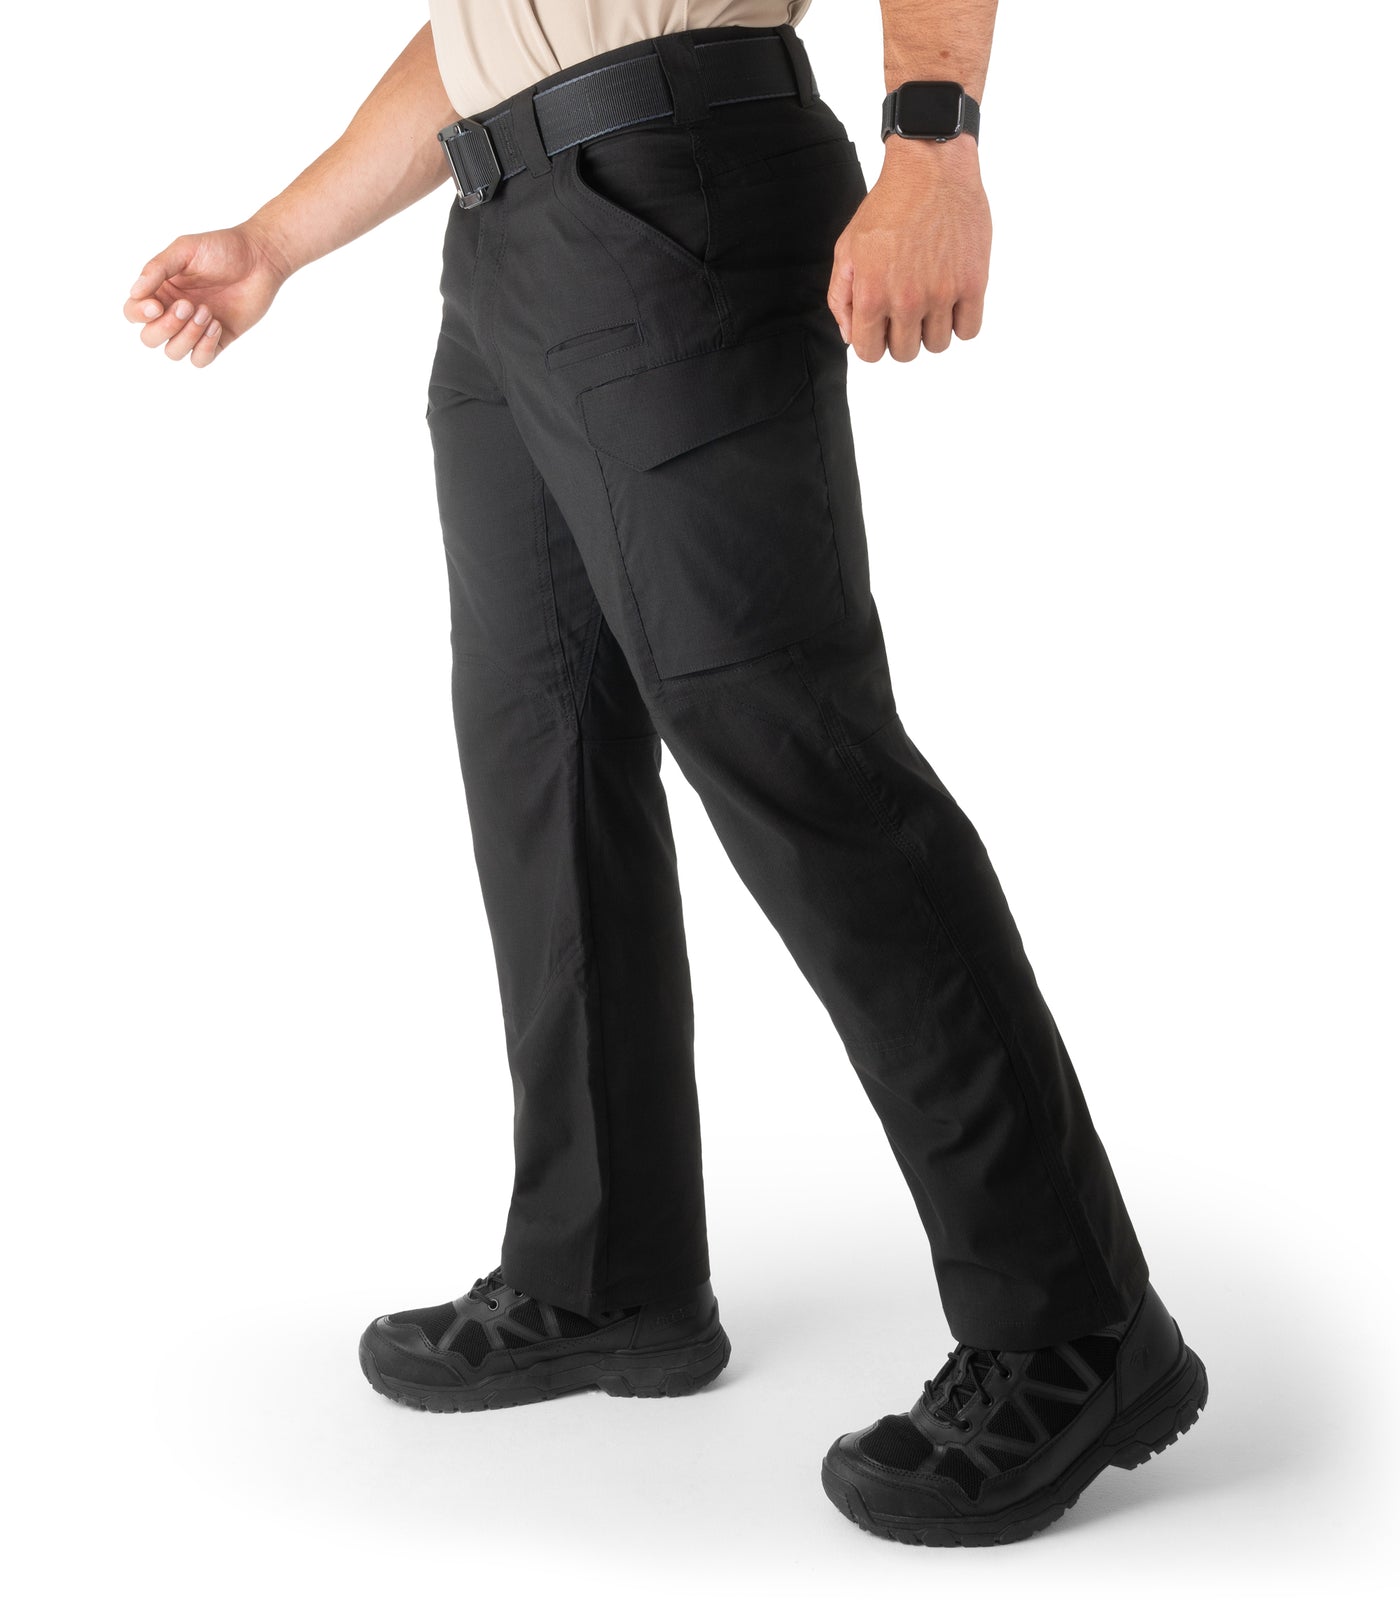 The V2 Tactical First Tactical – Pant